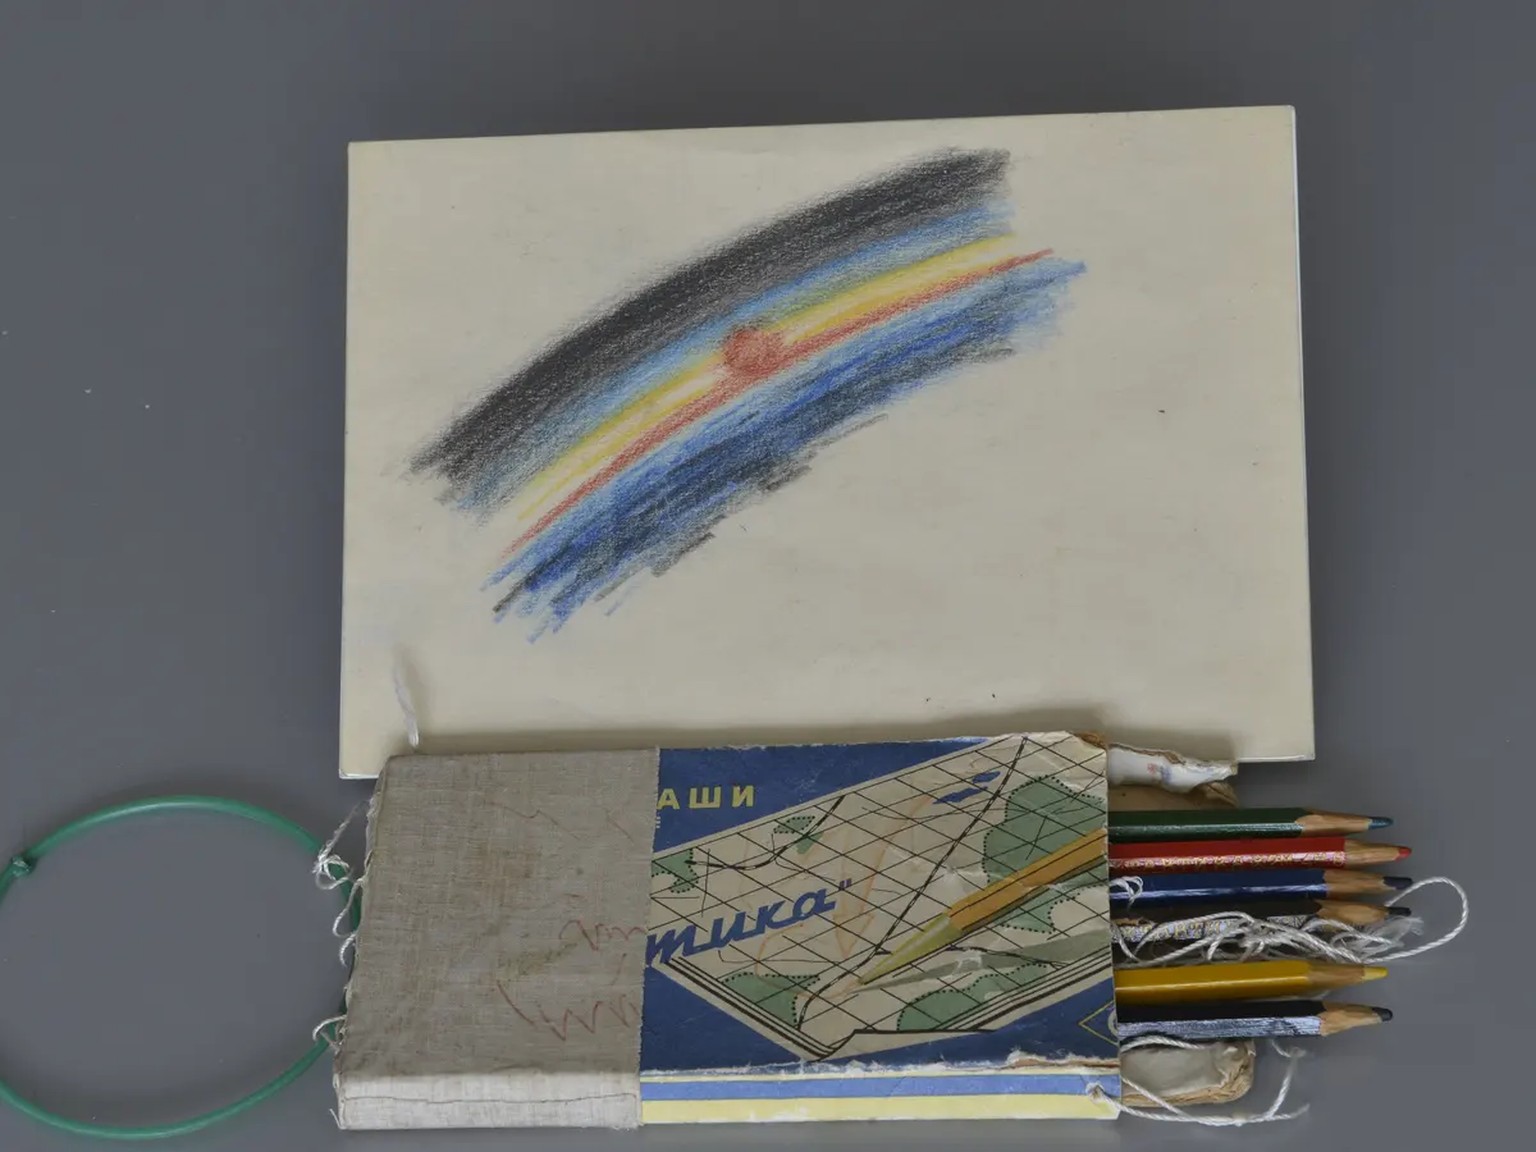 The first piece of art created in space, and the pencils Alexei Leonov used to draw it. Photograph: Museum of the Yuri Gagarin Cosmonaut Training Centre